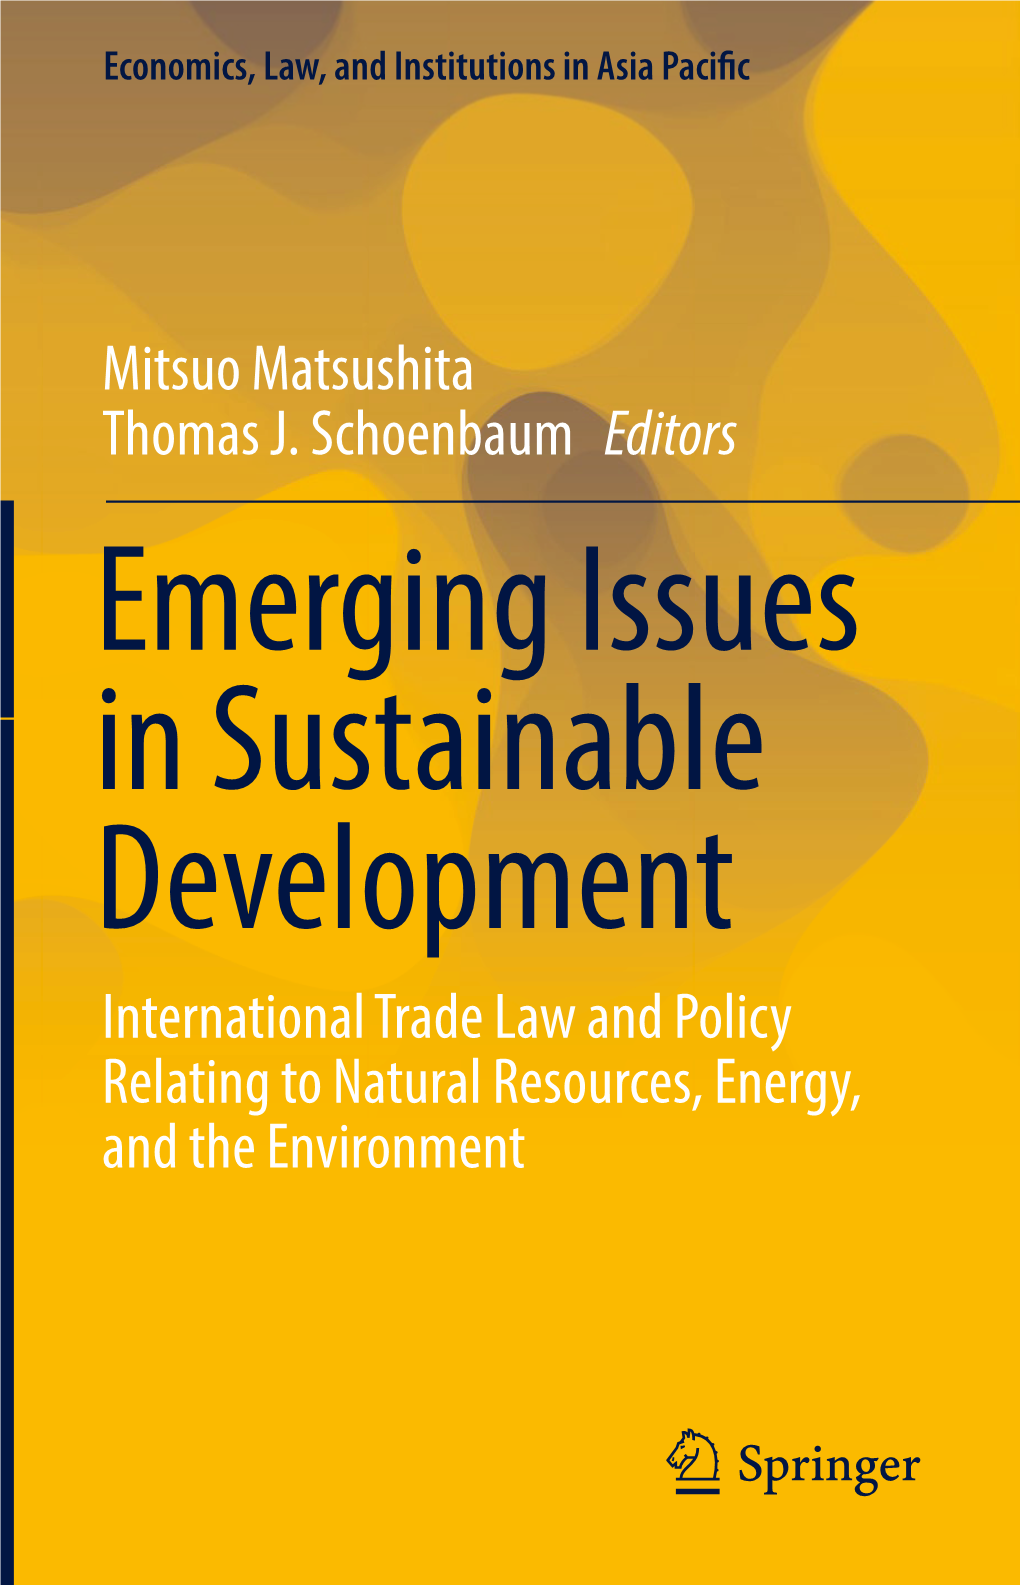 Emerging Issues in Sustainable Development International Trade Law and Policy Relating to Natural Resources, Energy, and the Environment